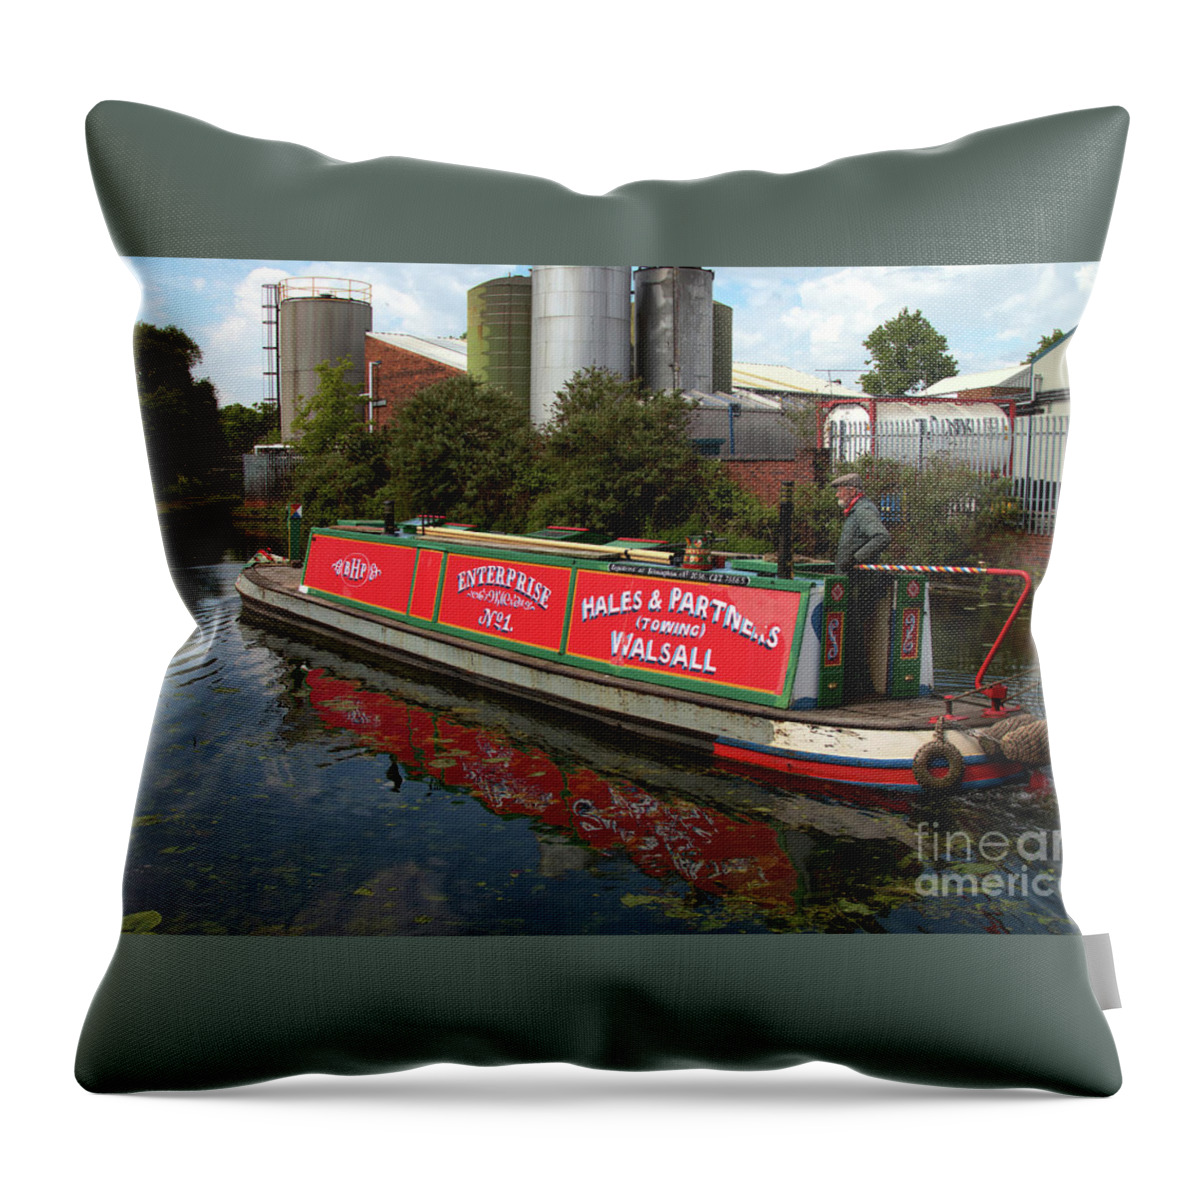 Work Throw Pillow featuring the photograph Enterprise No 1 by Baggieoldboy